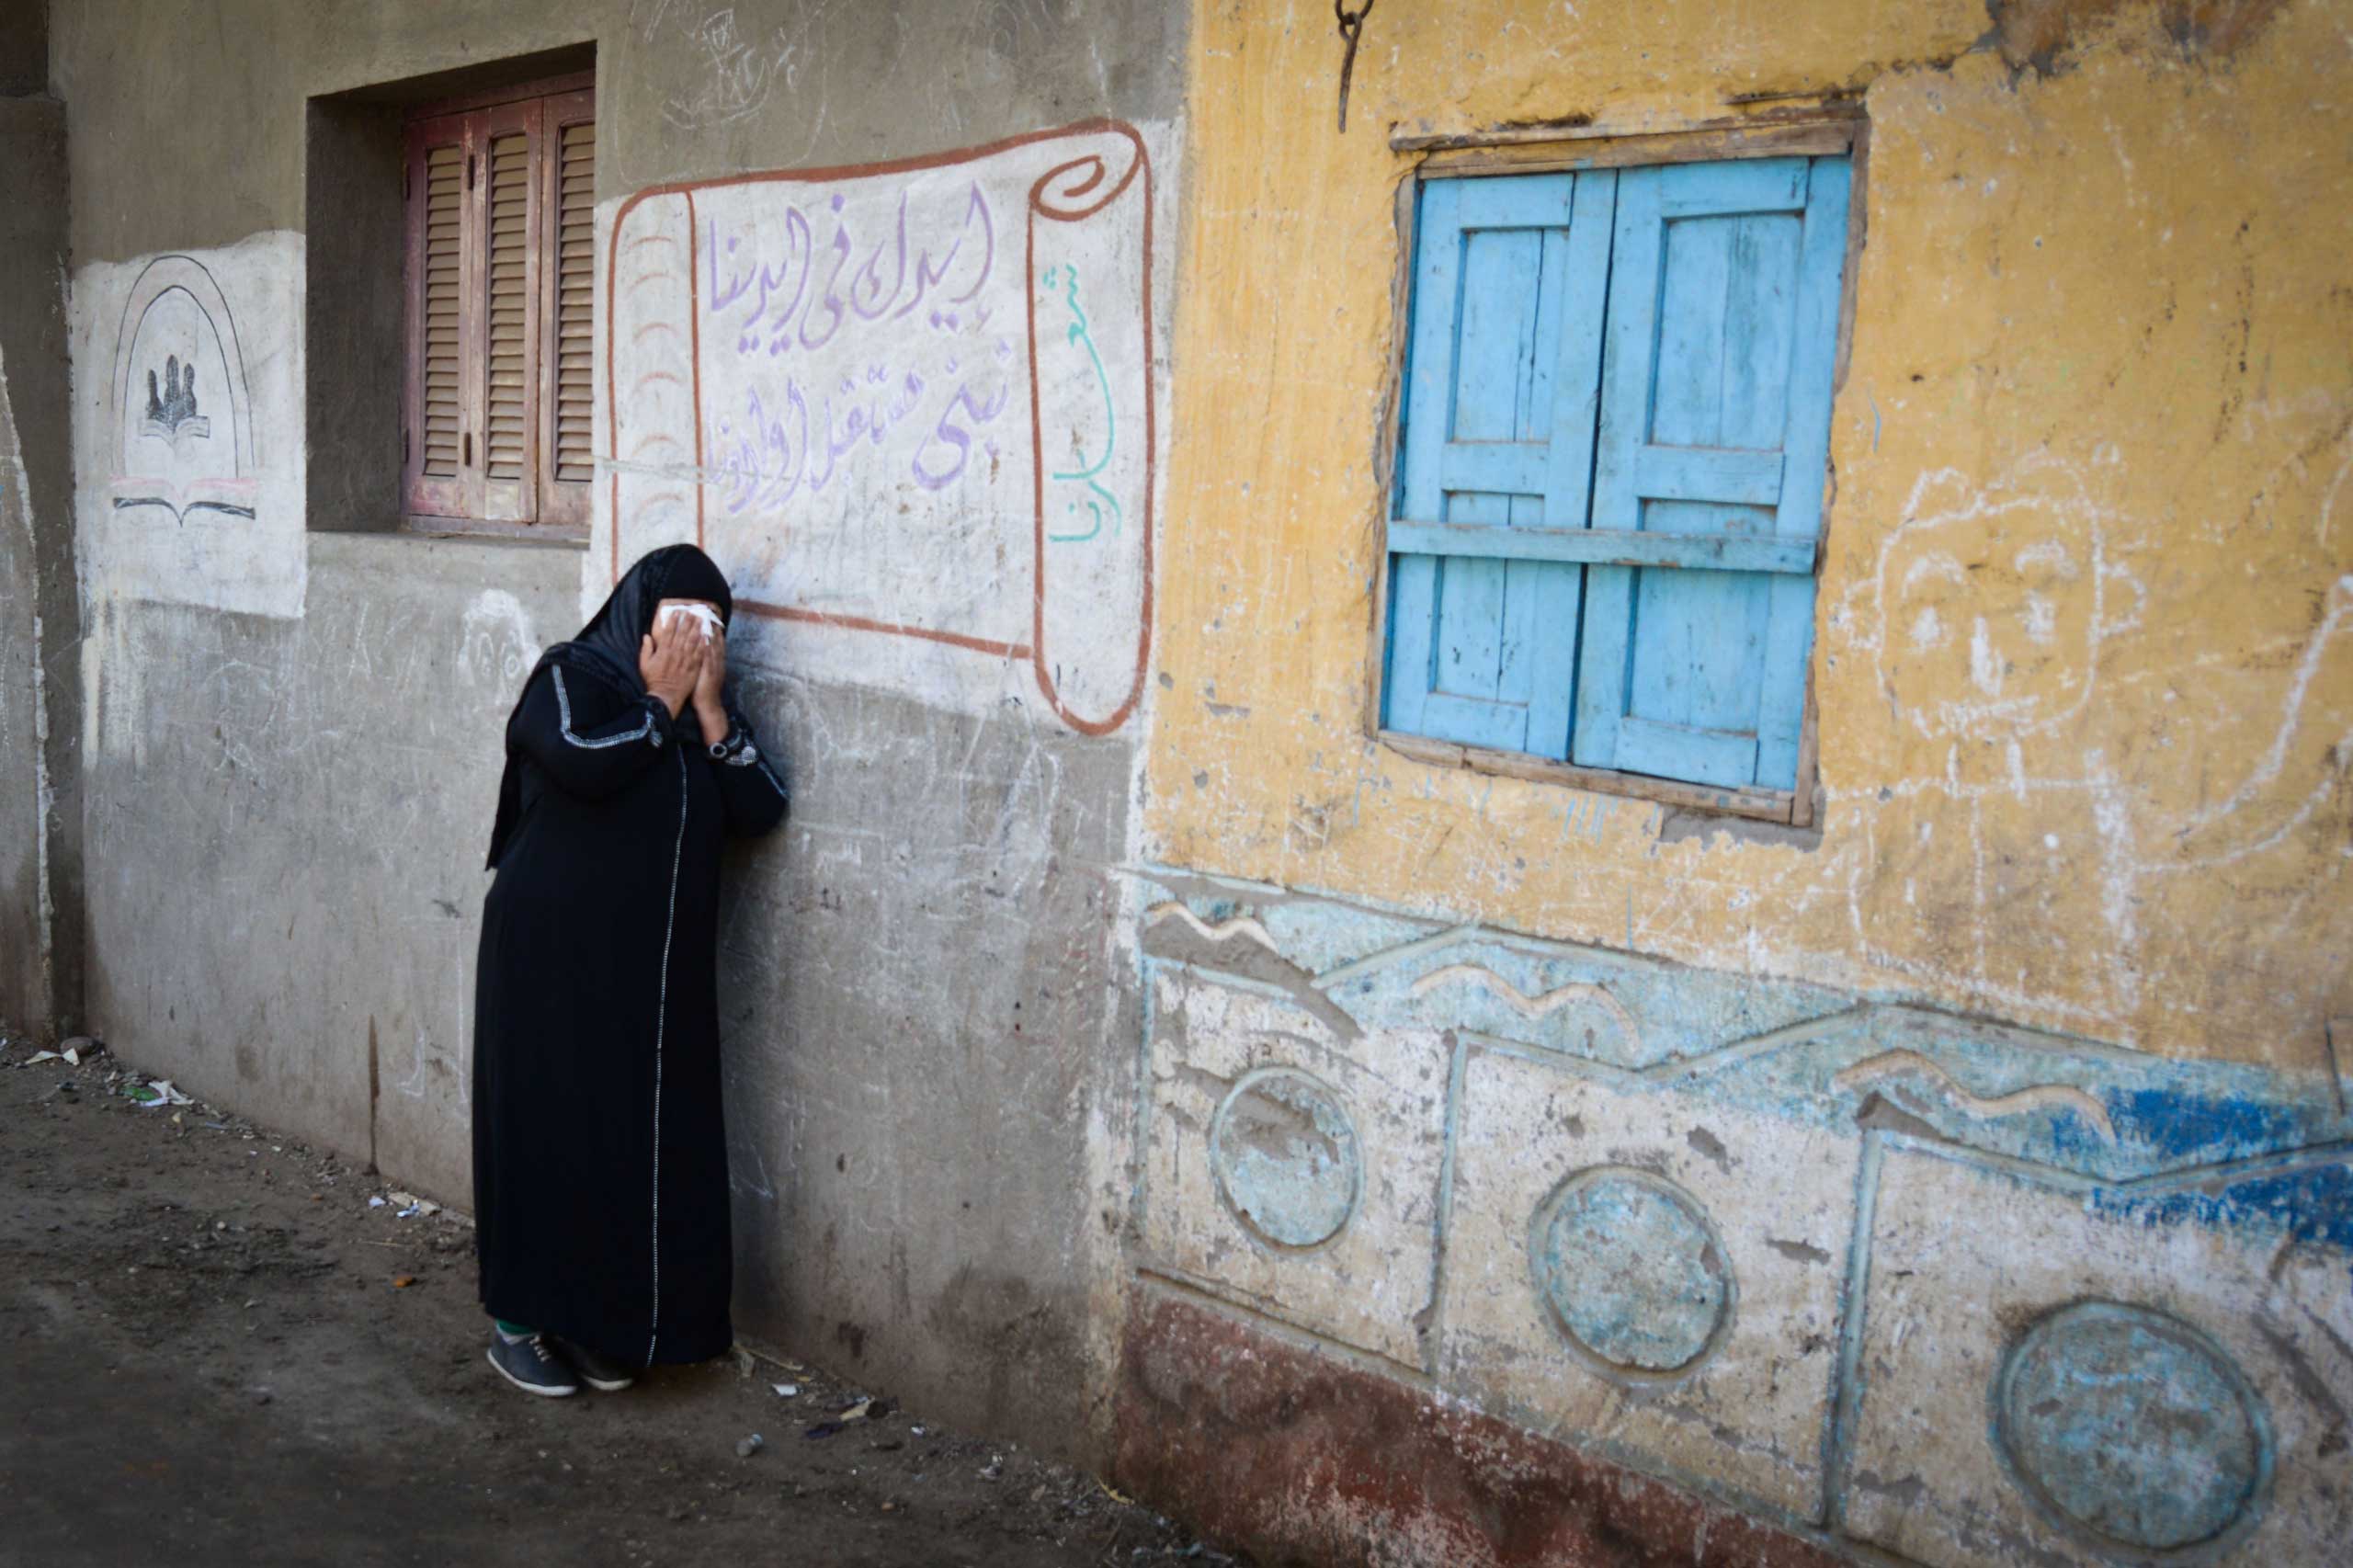 A relative of one of the Egyptian Coptic Christians purportedly killed by ISIS militants in Libya reacts after hearing the news on Feb. 16, 2015 in the village of Al-Our in Egypt's southern province of Minya.